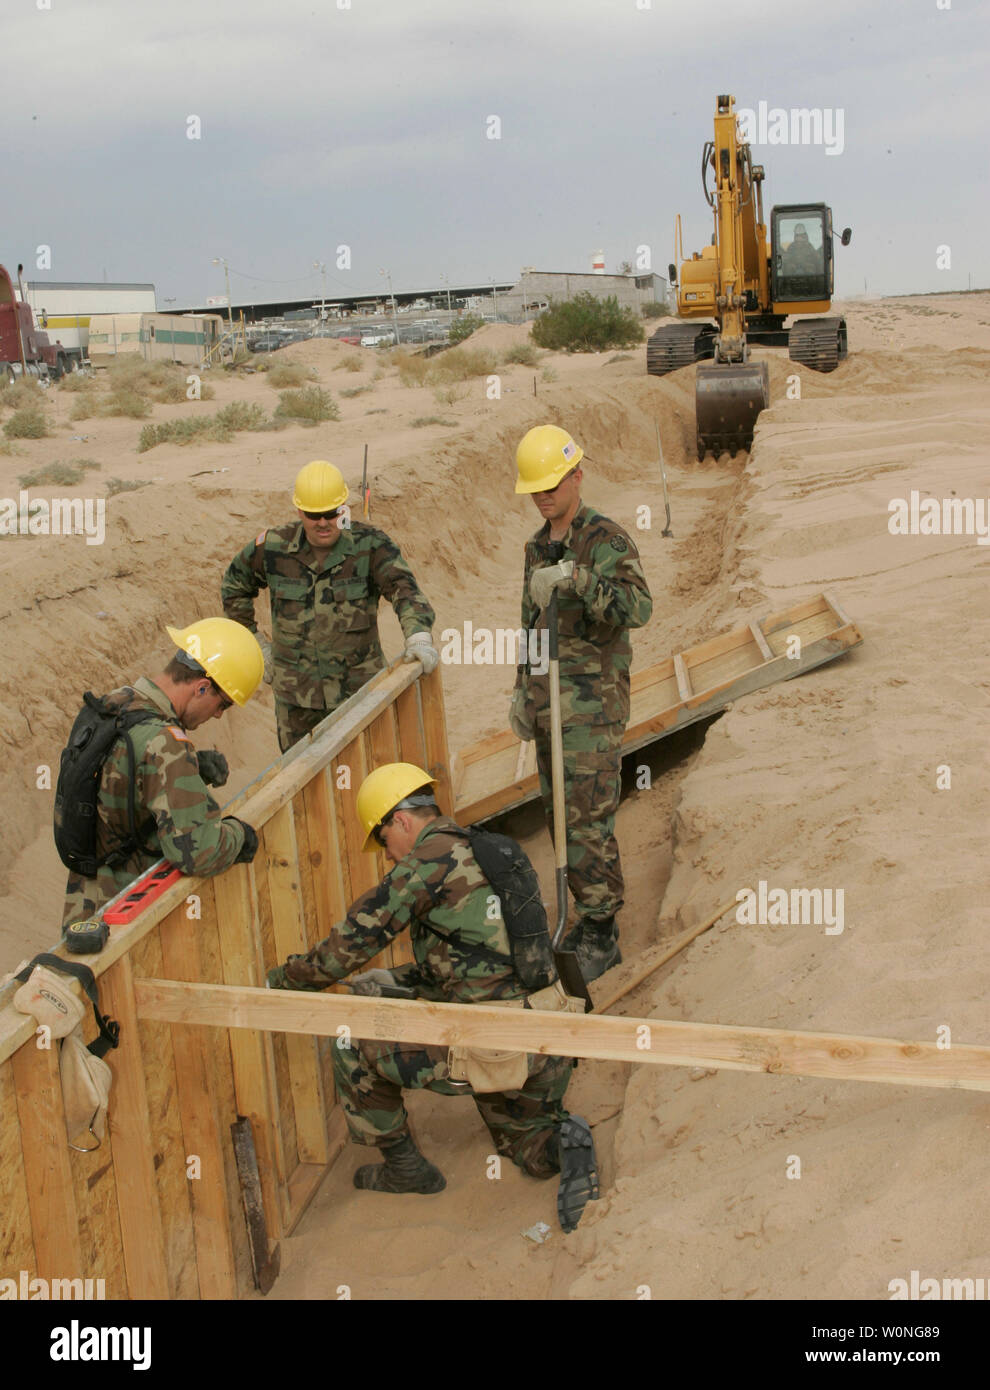 Utah National Guard members Thomas Carter of Roosevelt, Utah; Joshua Richards of Layton, Utah; Brad Young of Toowillow, Utah; and Staff Sgt John Bylsma of Pleasant Grove, Utah install concrete forms to support the fence at the Arizona border with Mexico in San Luis, Arizona June 6, 2006.   More than 50 National Guardsmen from Utah became the first unit to get to work under President George W. Bush's crackdown on illegal immigration.   (UPI Photo/Will Powers) Stock Photo